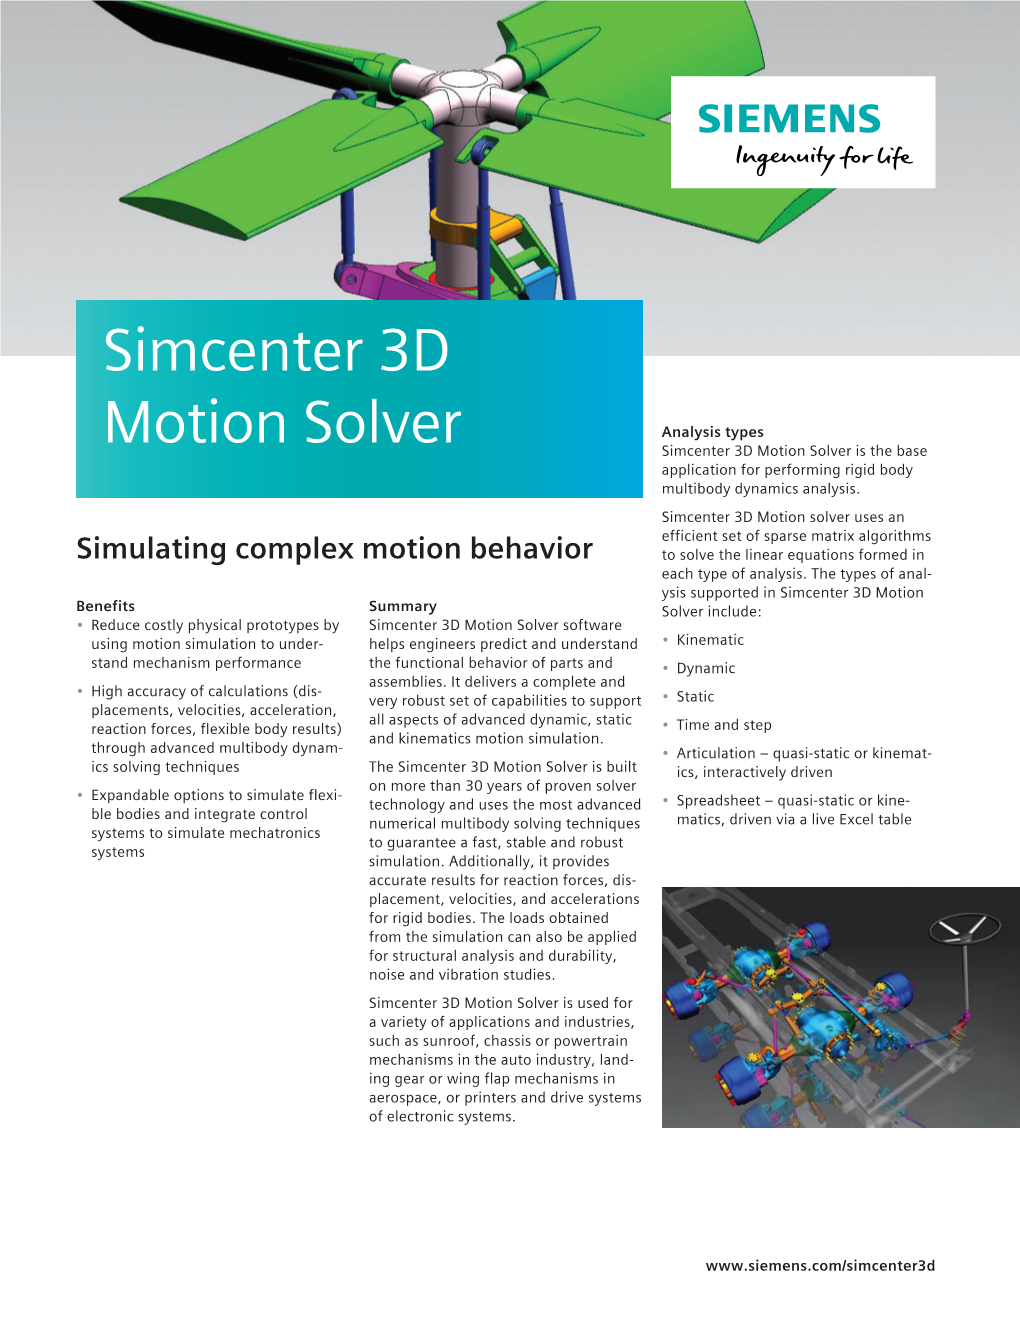 Simcenter 3D Motion Solver Is the Base Application for Performing Rigid Body Multibody Dynamics Analysis